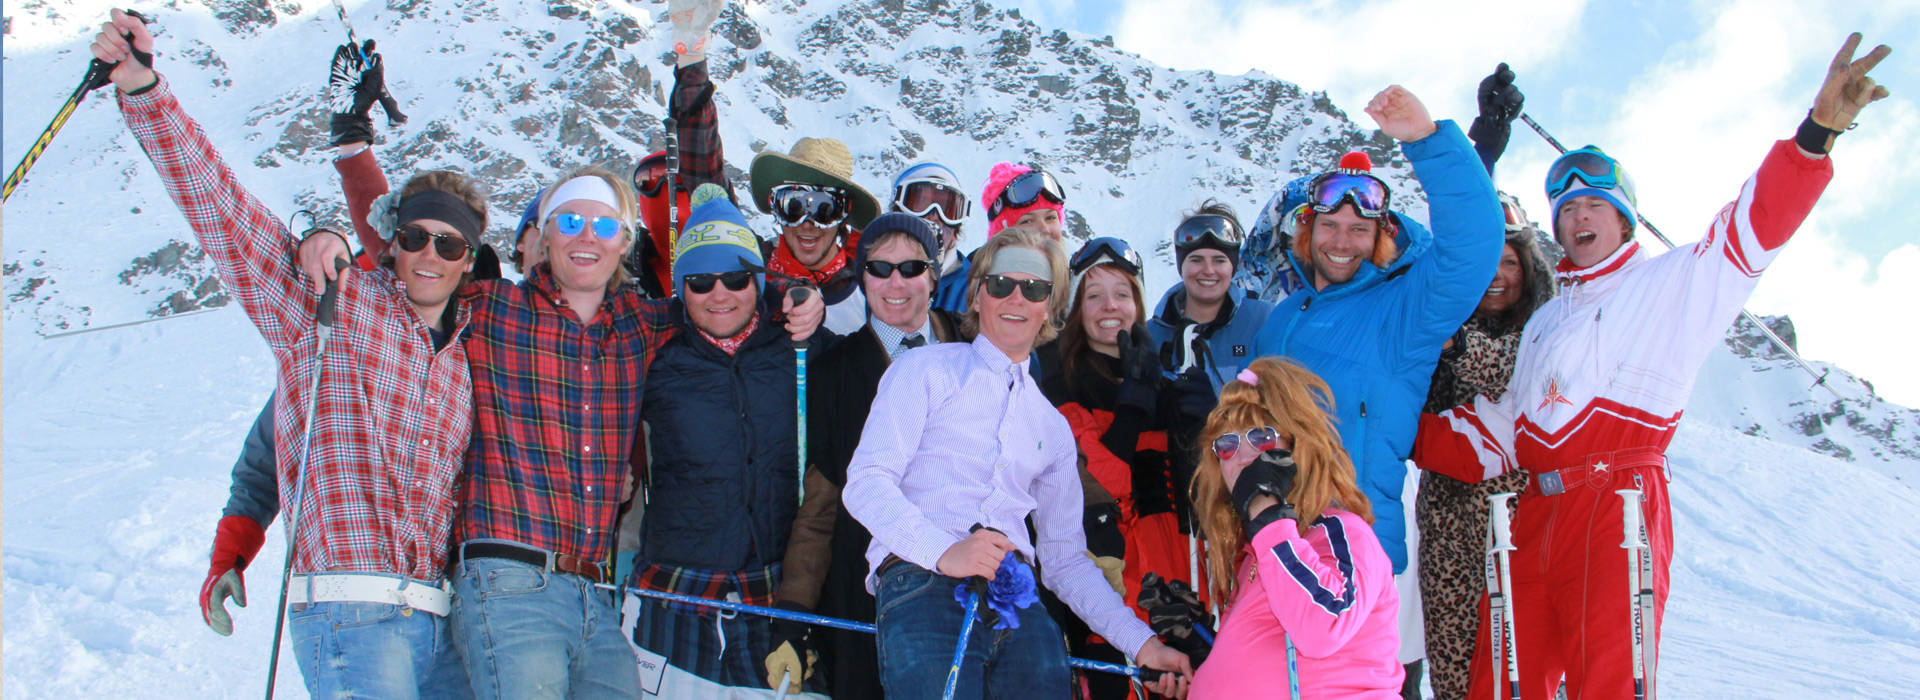 How to choose the best ski instructor course for you?